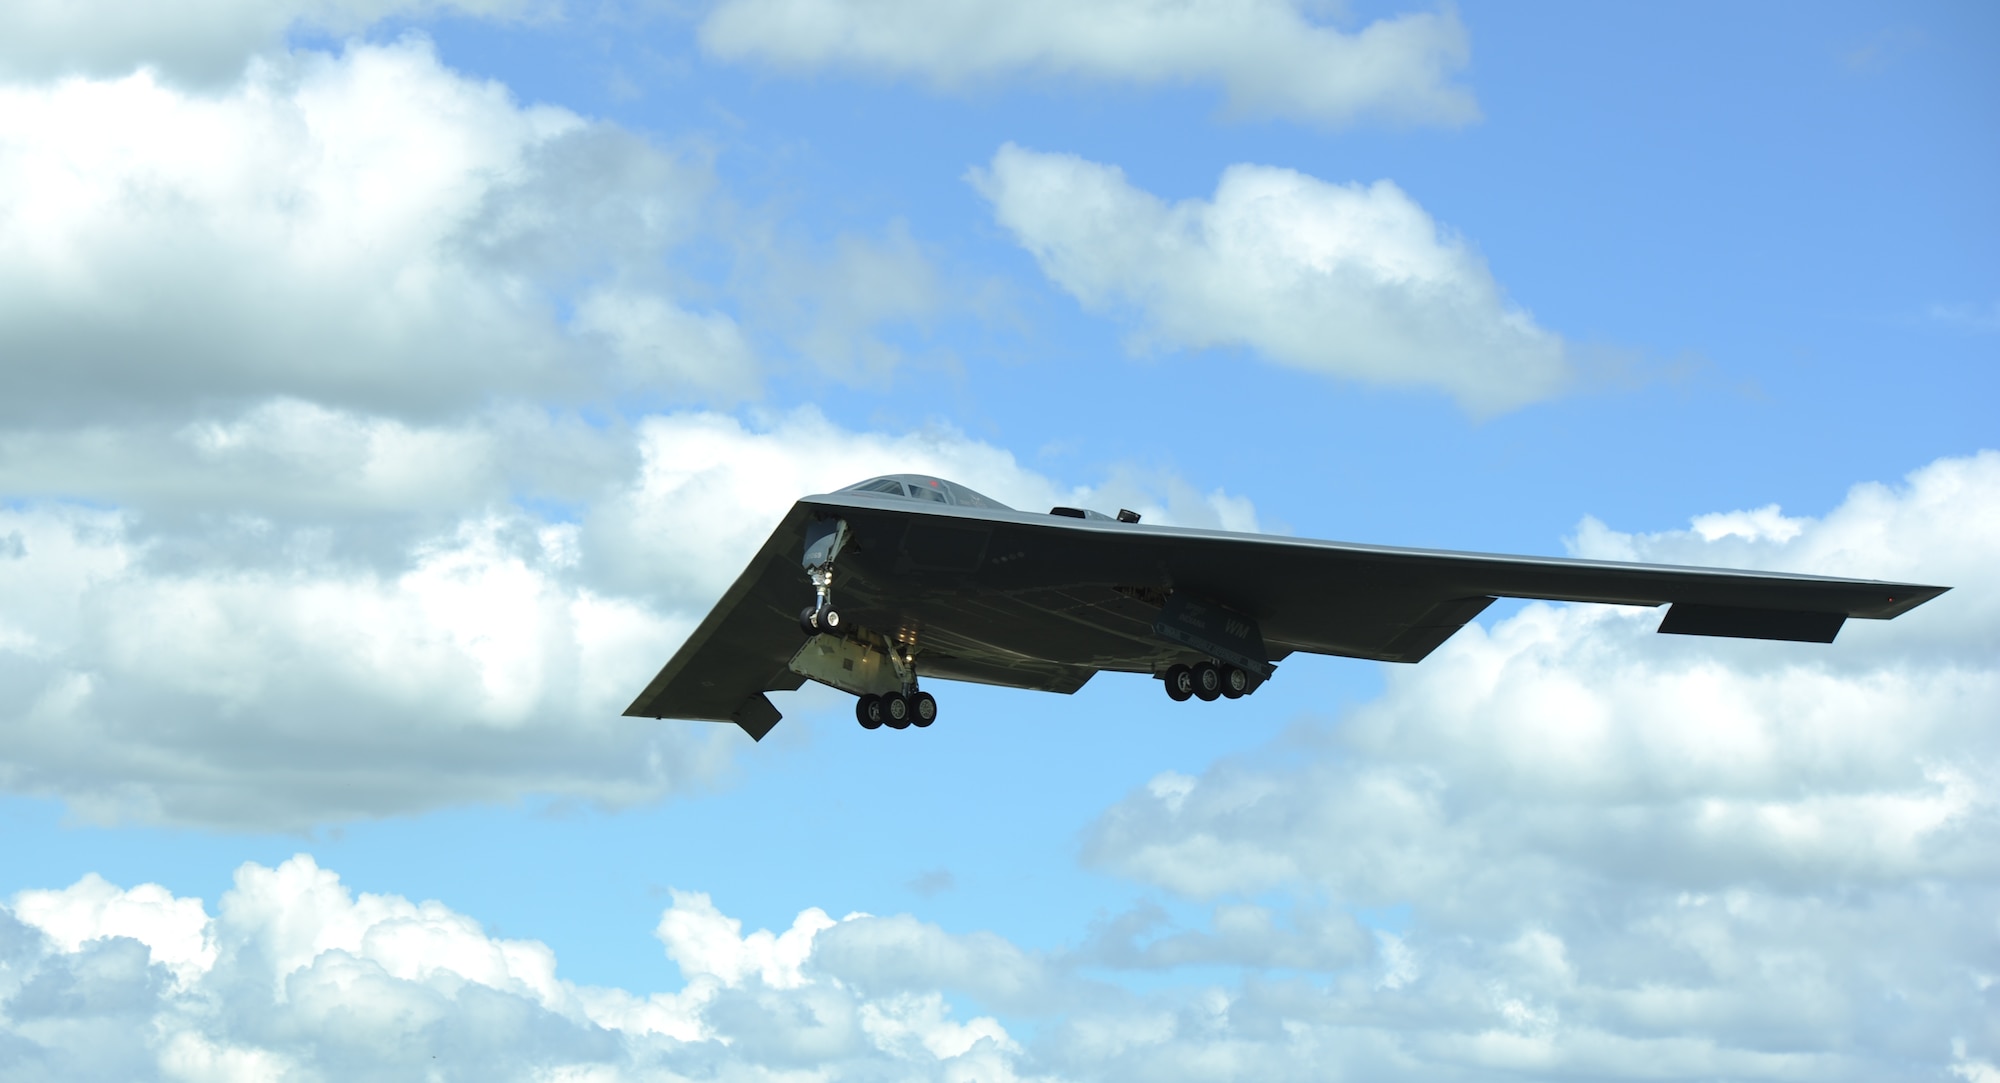 The “Spirit of Indiana,” a B-2 Spirit from Whiteman Air Force Base, Missouri, prepares to land on the runway at RAF Fairford, England, June 8, 2014. The B-2 Spirit is a multi-role bomber capable of delivering both conventional and nuclear munitions. (U.S. Air Force photo by Staff Sgt. Nick Wilson/Released)